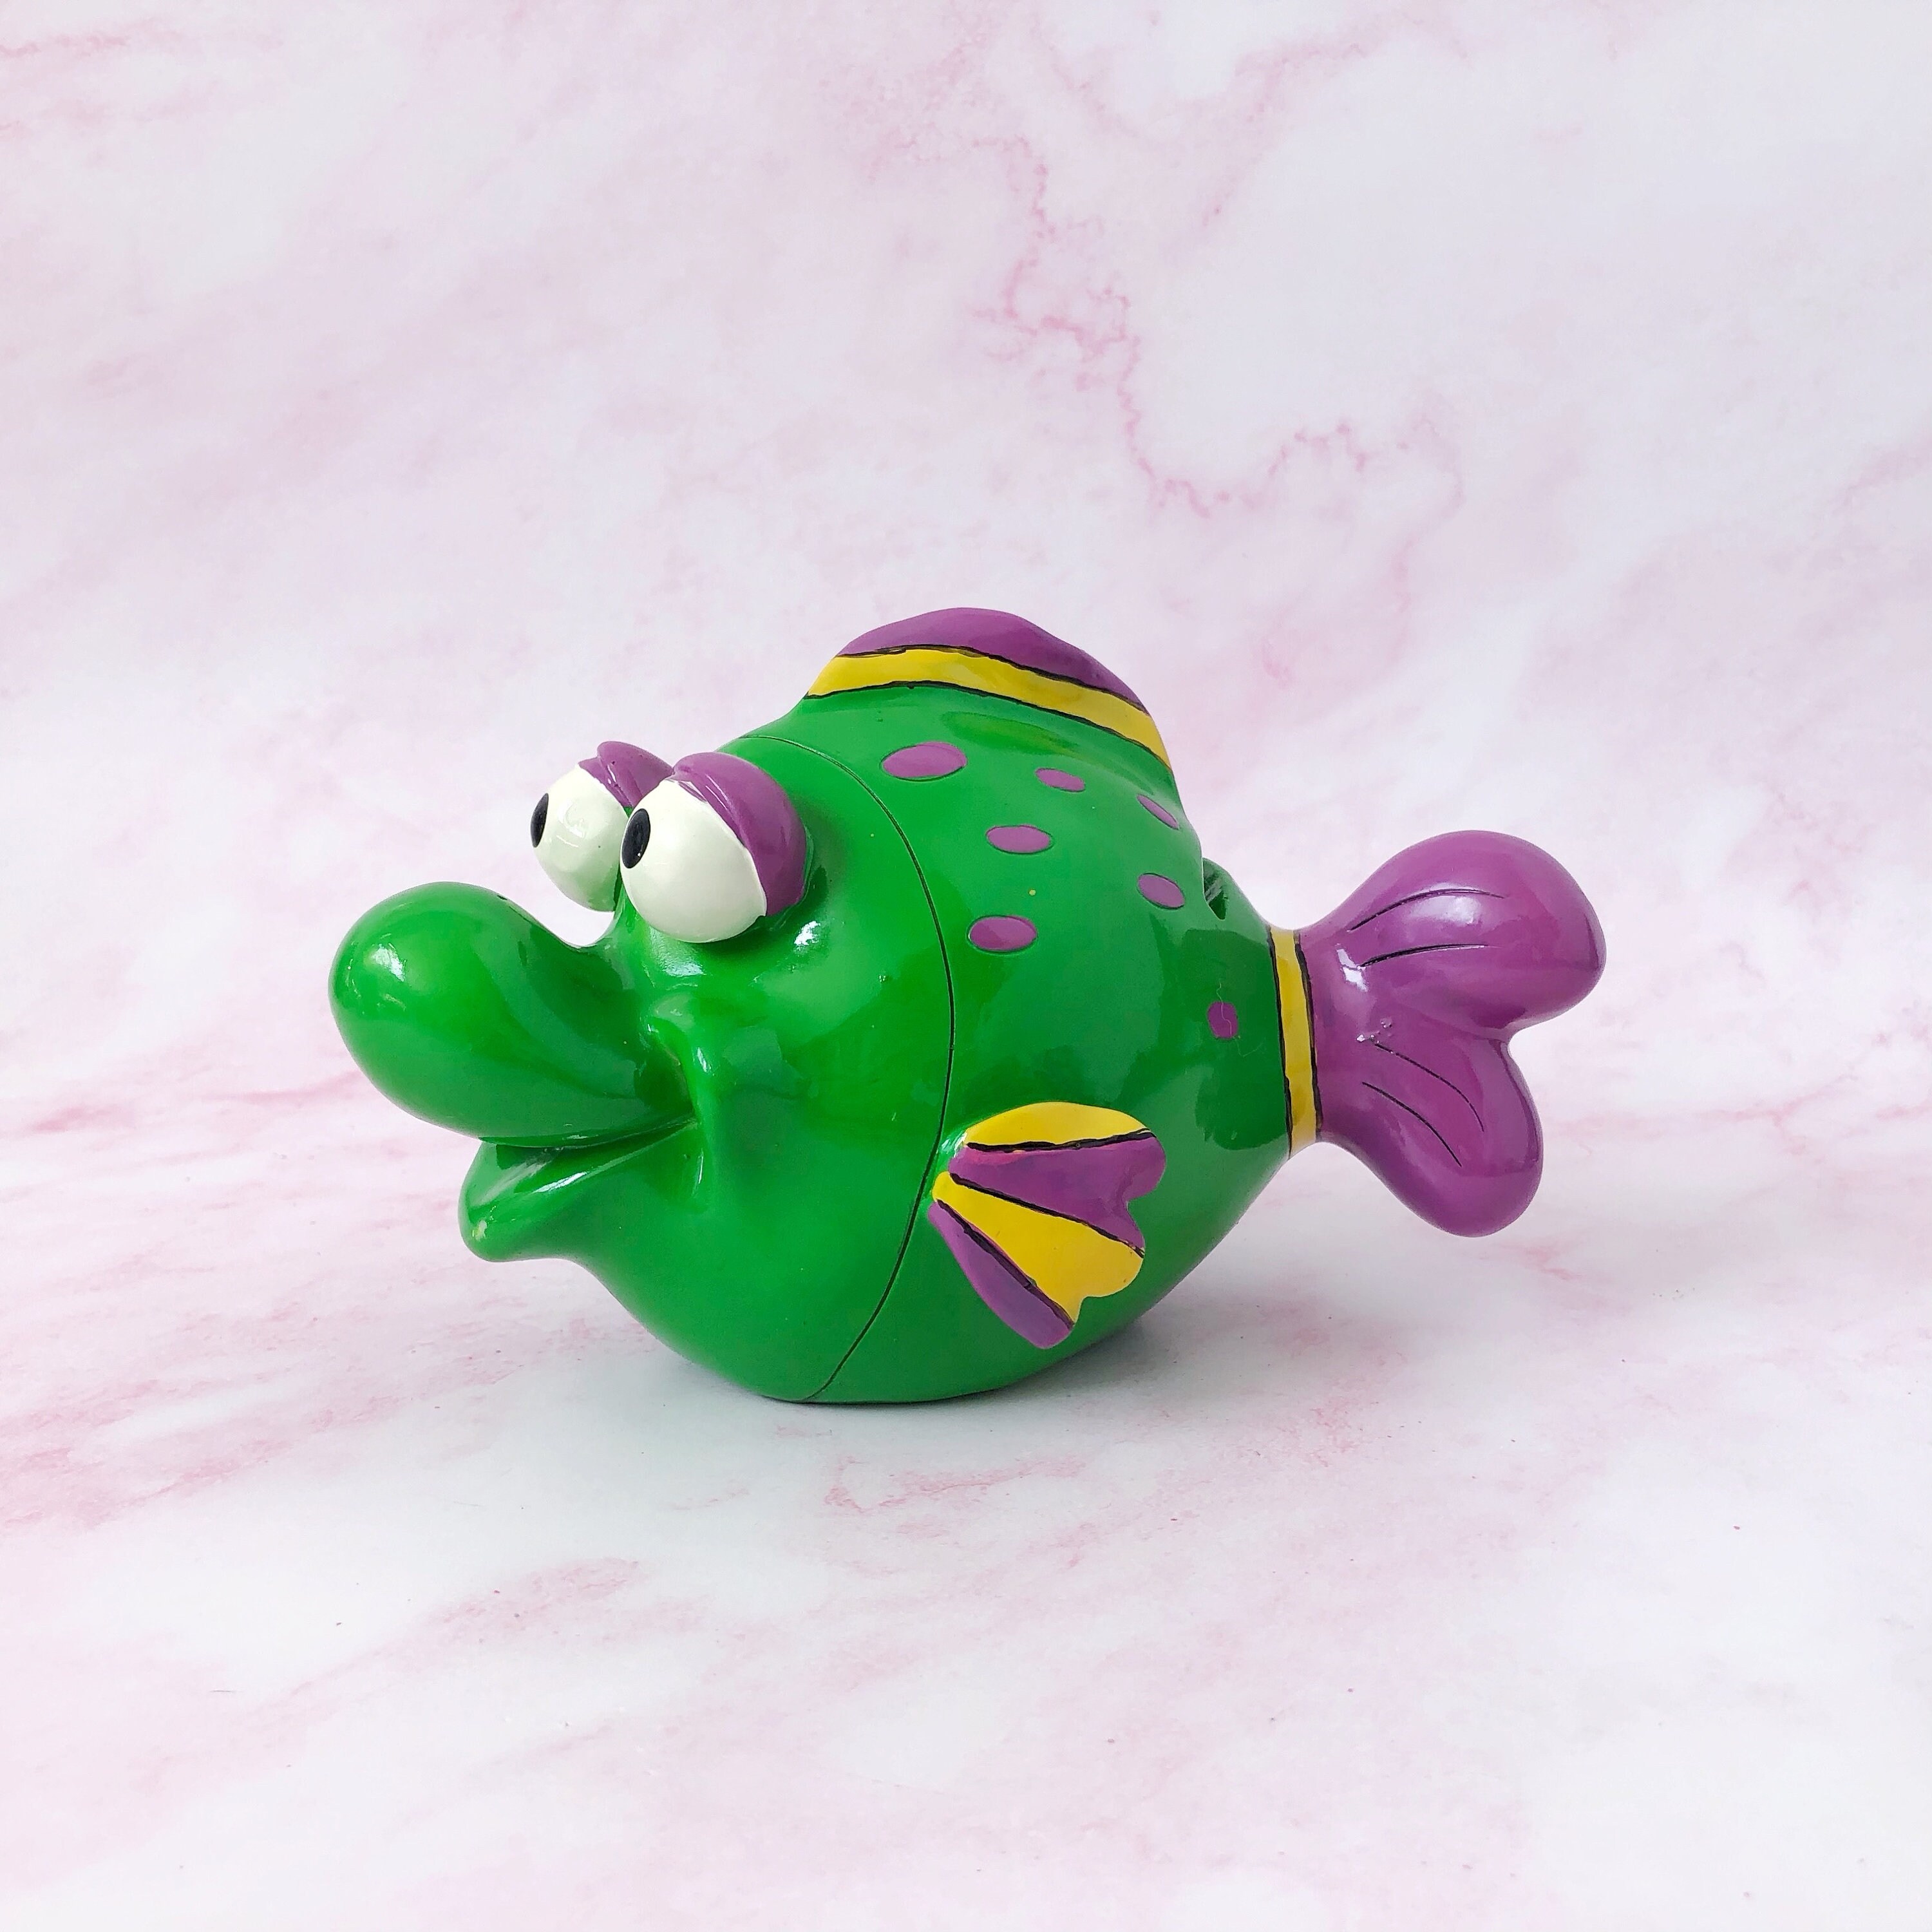 Kitschy Acrylic Fish Bank - Cute, Quirky Fish Shaped Piggy Bank - Weird  Vintage Hard Plastic Green and Purple Animal Coin Bank for Boys Kids